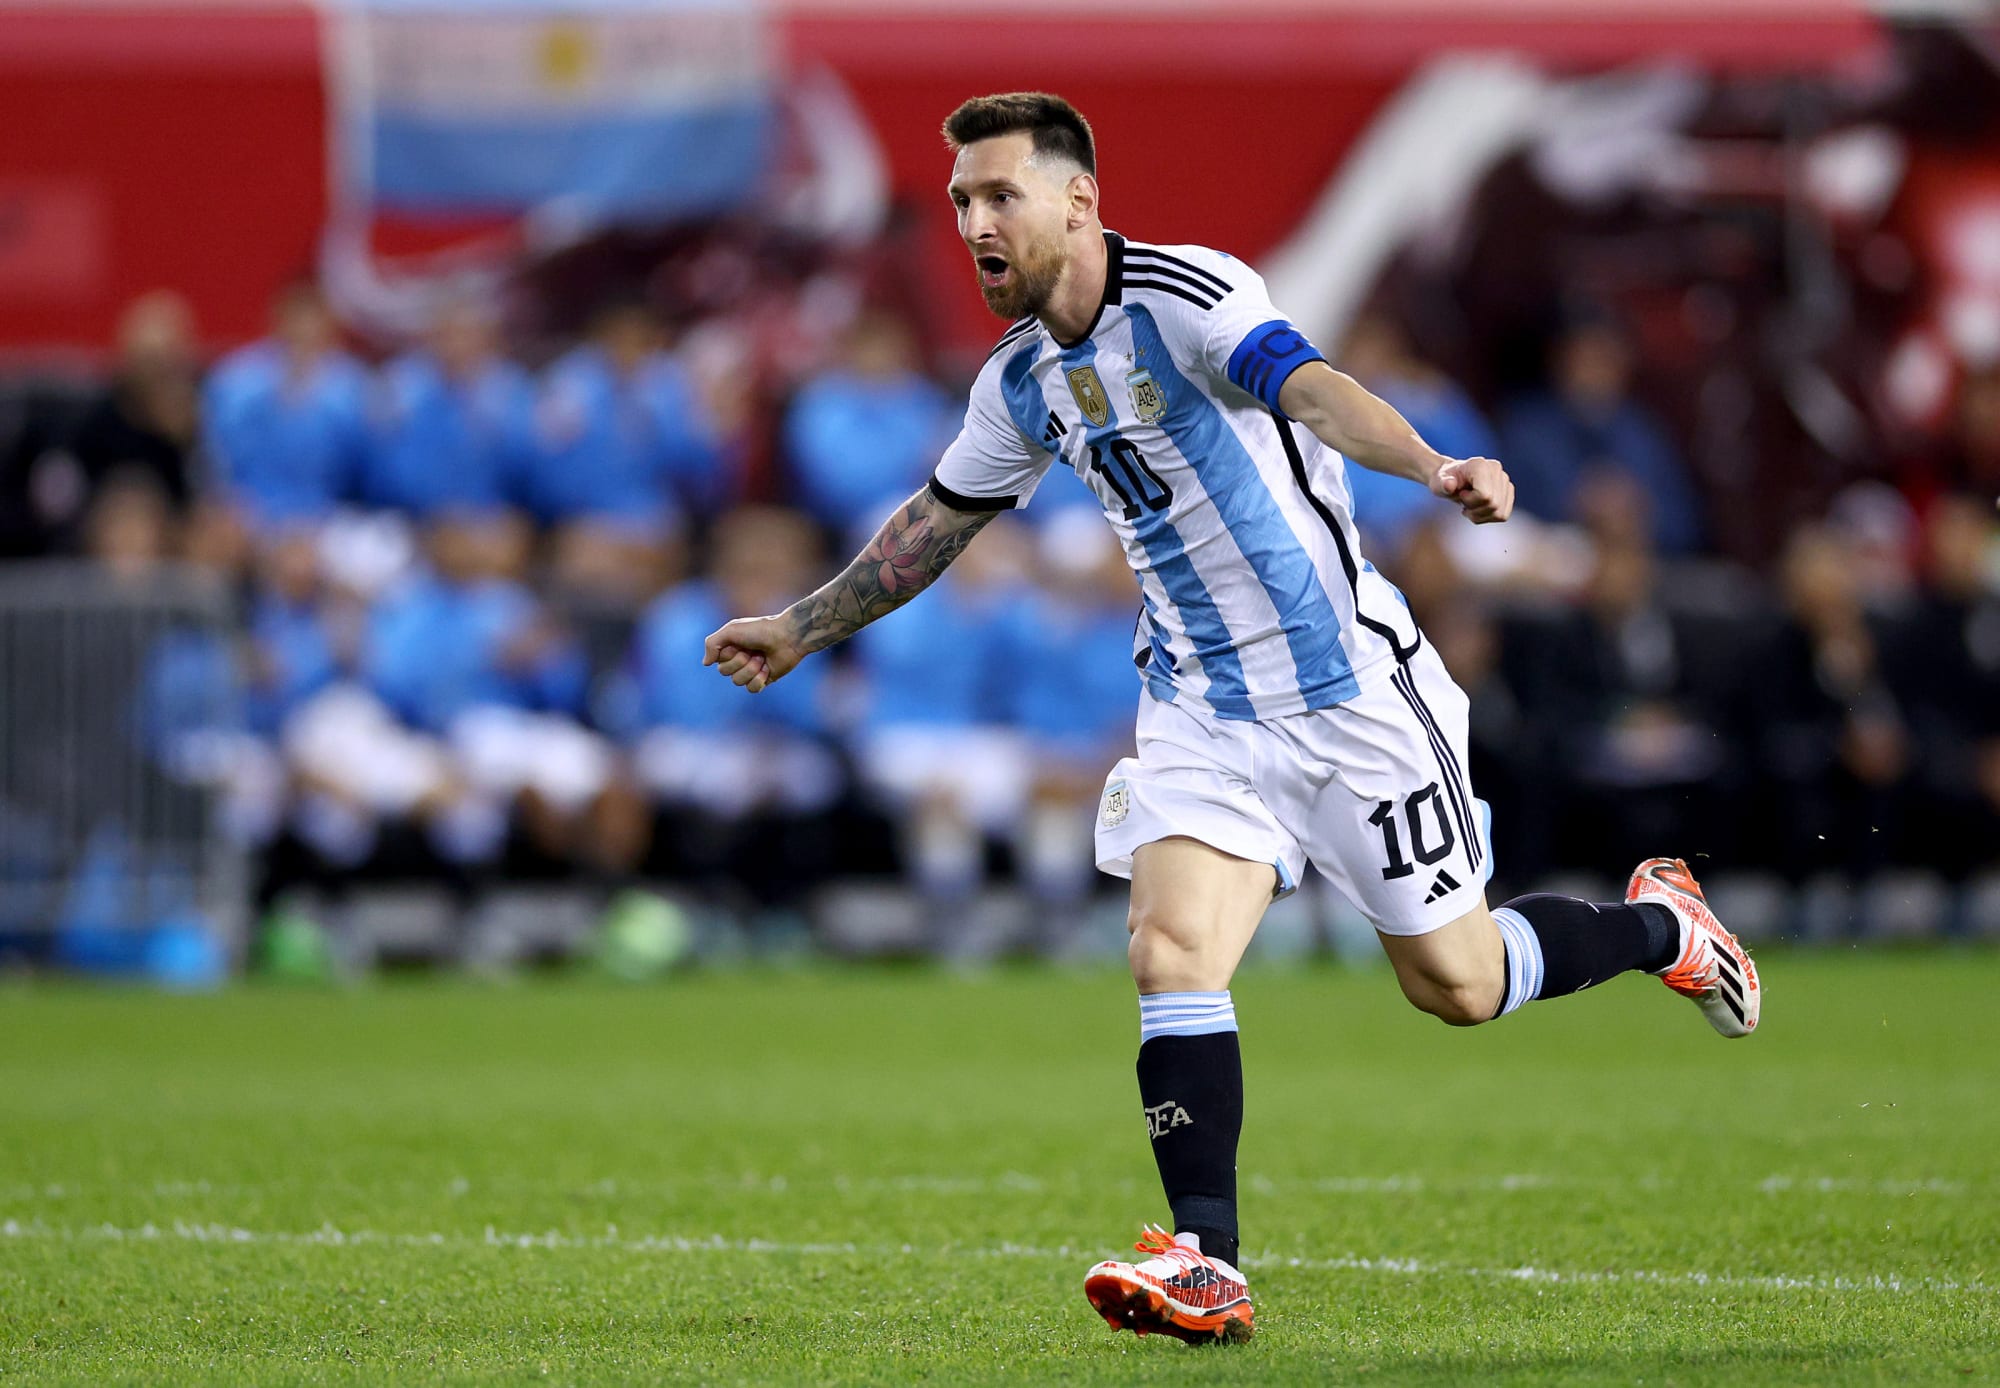 Lionel Messi’s current form makes Argentina favorites to win the World Cup